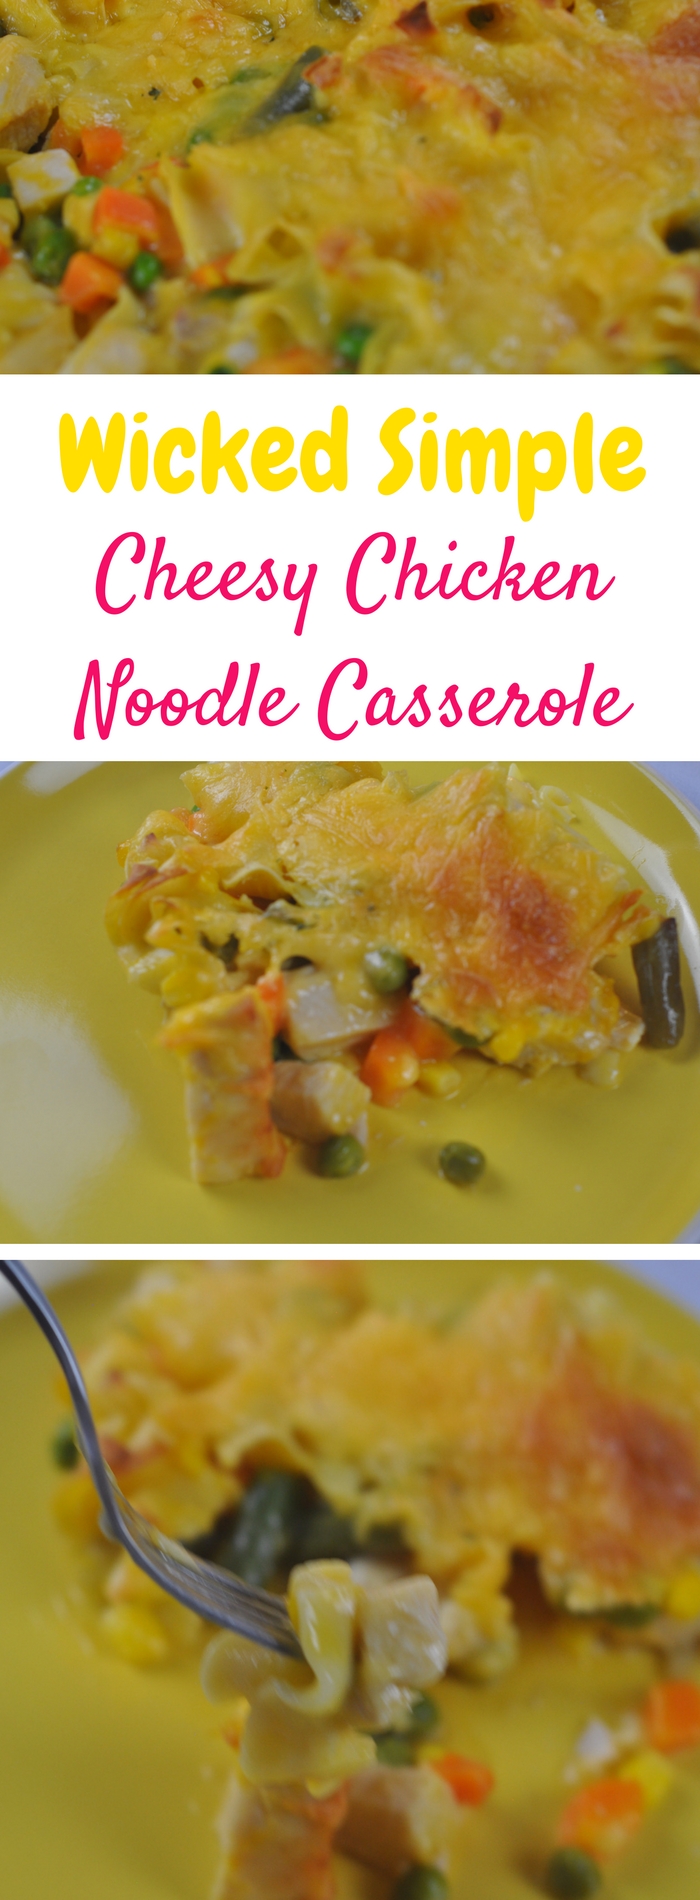 This wicked simple cheesy chicken noodle casserole is DELICIOUS and it only takes 5 minutes to throw together!